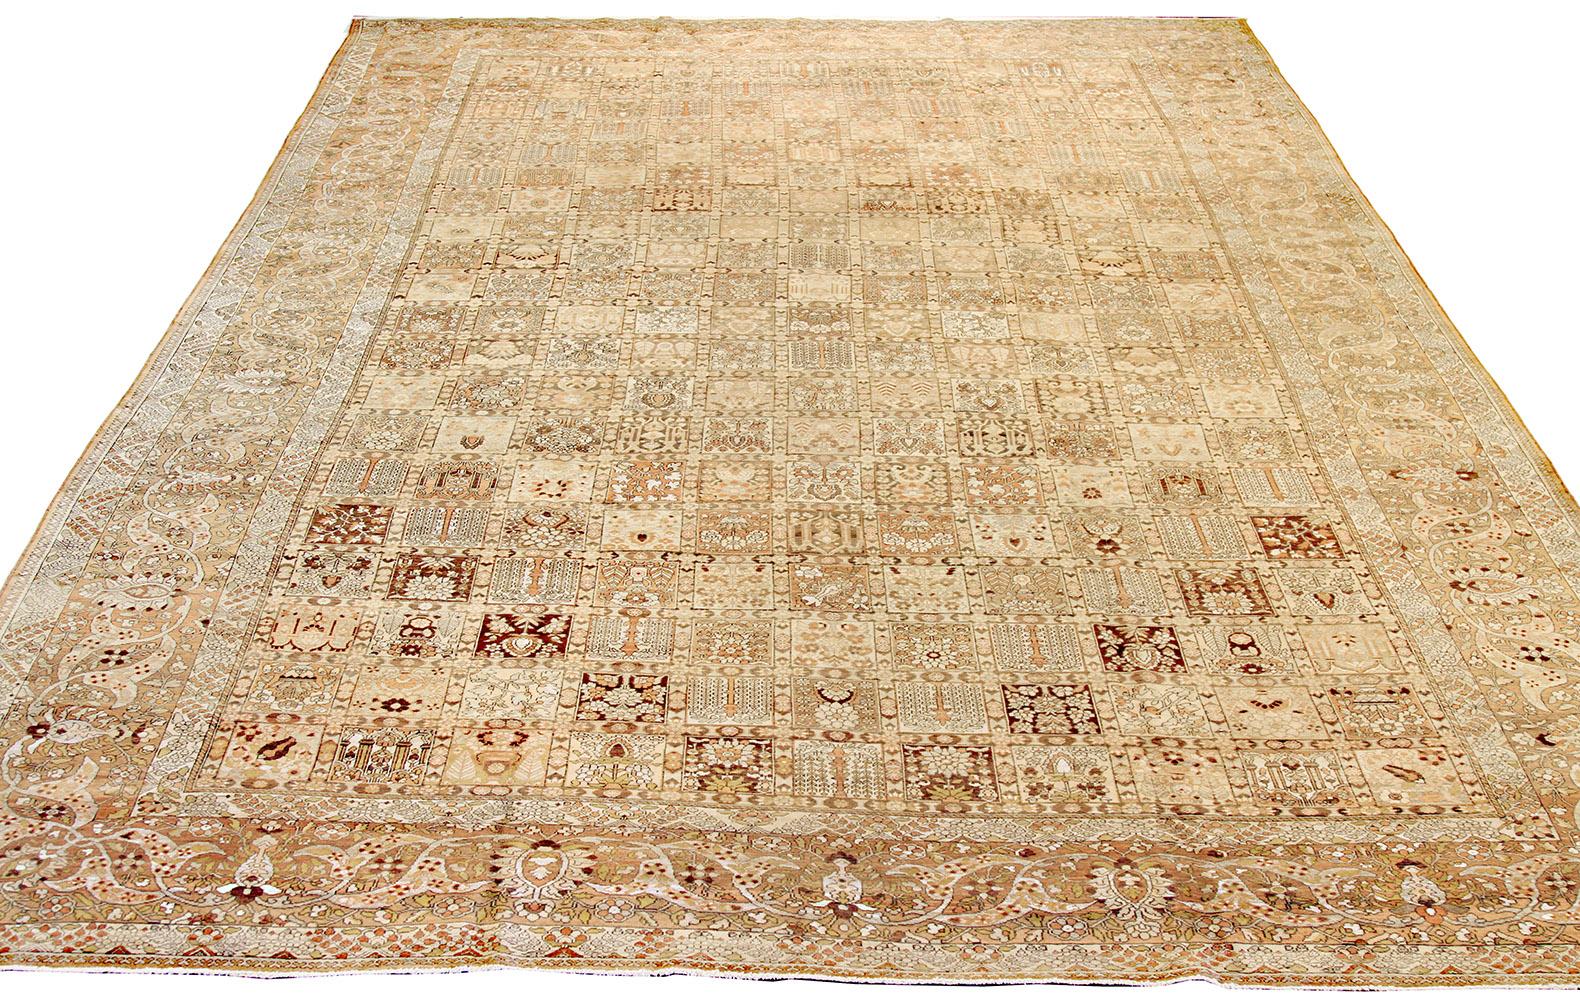 Antique Persian rug handwoven from the finest sheep’s wool and colored with all-natural vegetable dyes that are safe for humans and pets. It’s a traditional Bakhtiar design highlighted by brown and white botanical details over an ivory field. It’s a